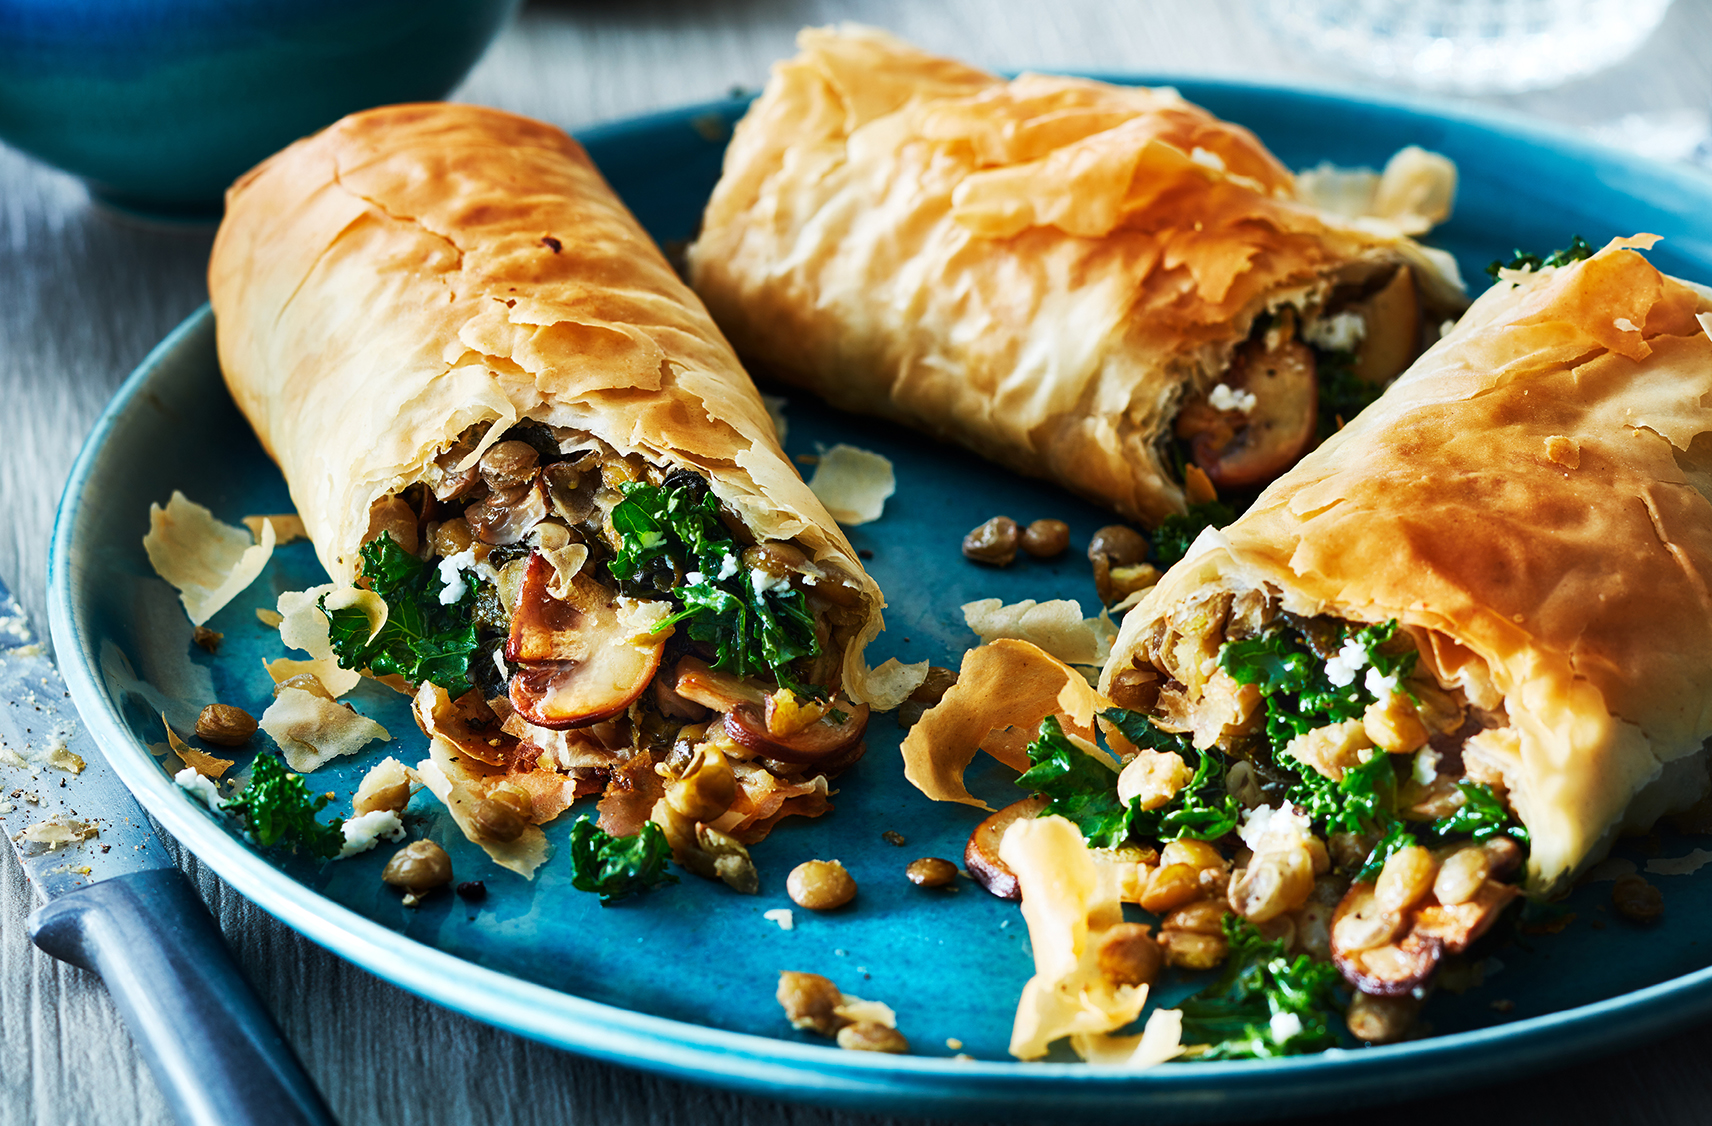 three strudels stuffed with savoury kale and mushroom mixture.  served on a blue plate